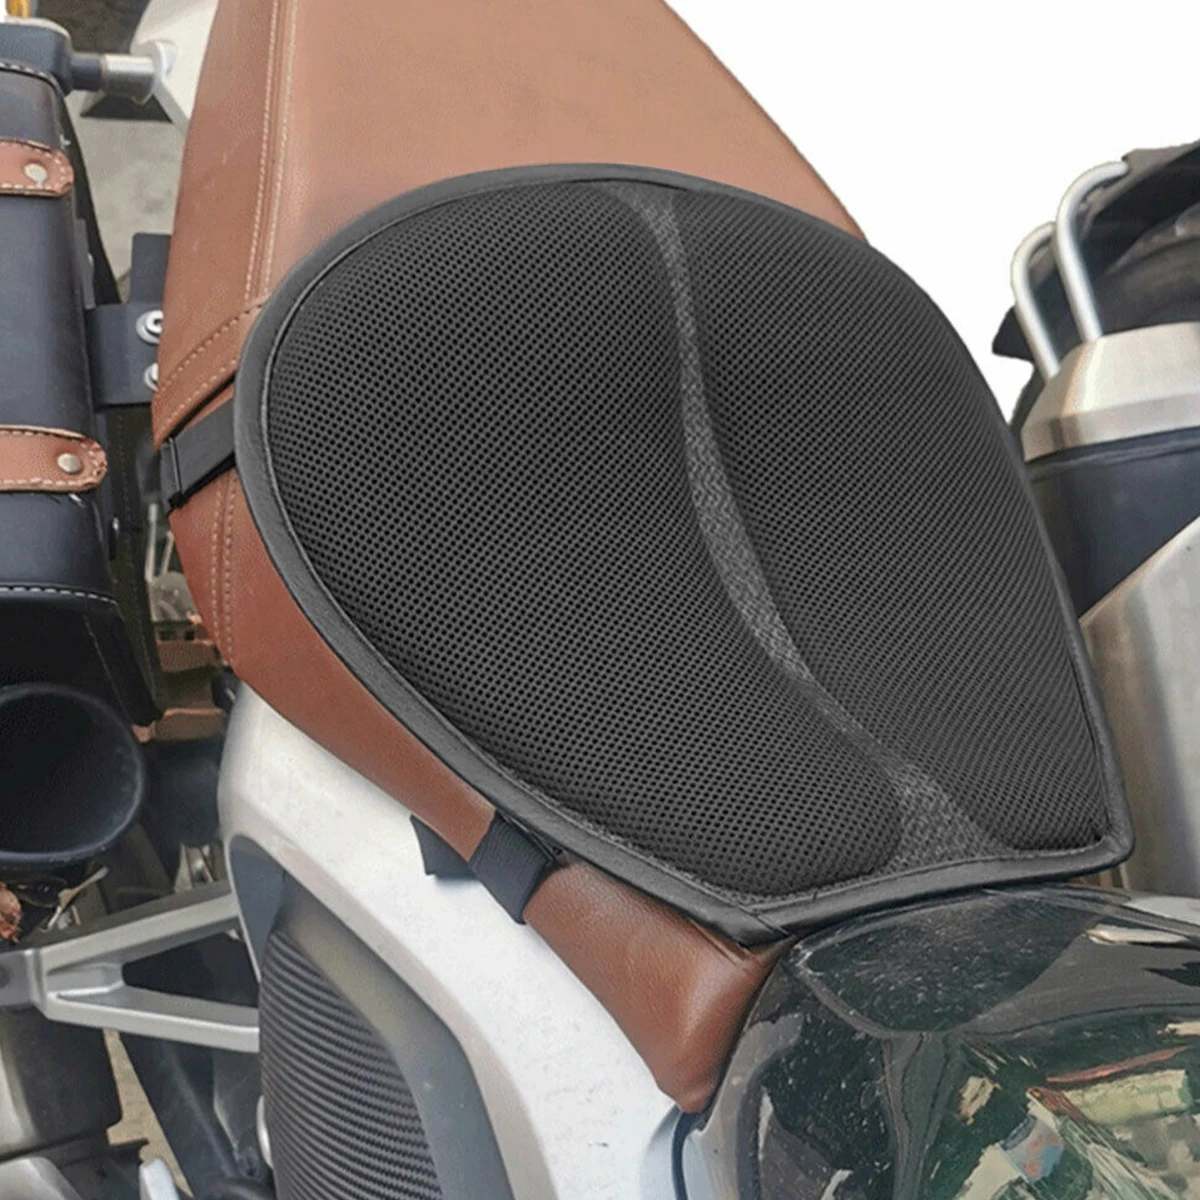 Motorcycle Seat Cushion 5-Layer Shock Absorption Motorbike Seat Pad Nonslip 3D Breathable Motorcycle Protective Ride Saddle Seat